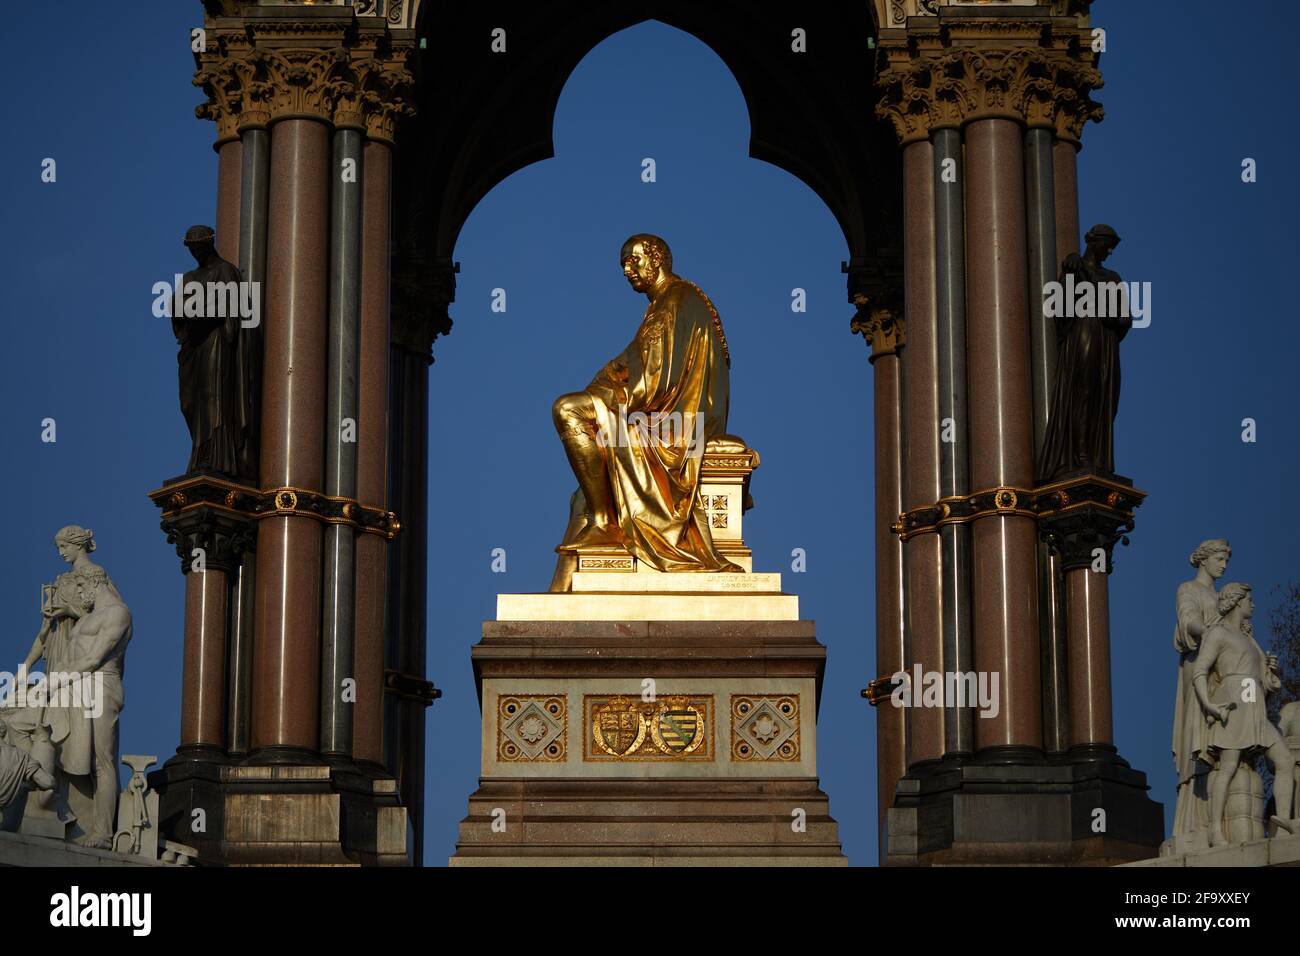 London, UK - 20 Apr 2021: The gilt bronze statue of Prince Albert that forms the central portion of the Albert Memorial. Designed by John Henry Foley. Stock Photo